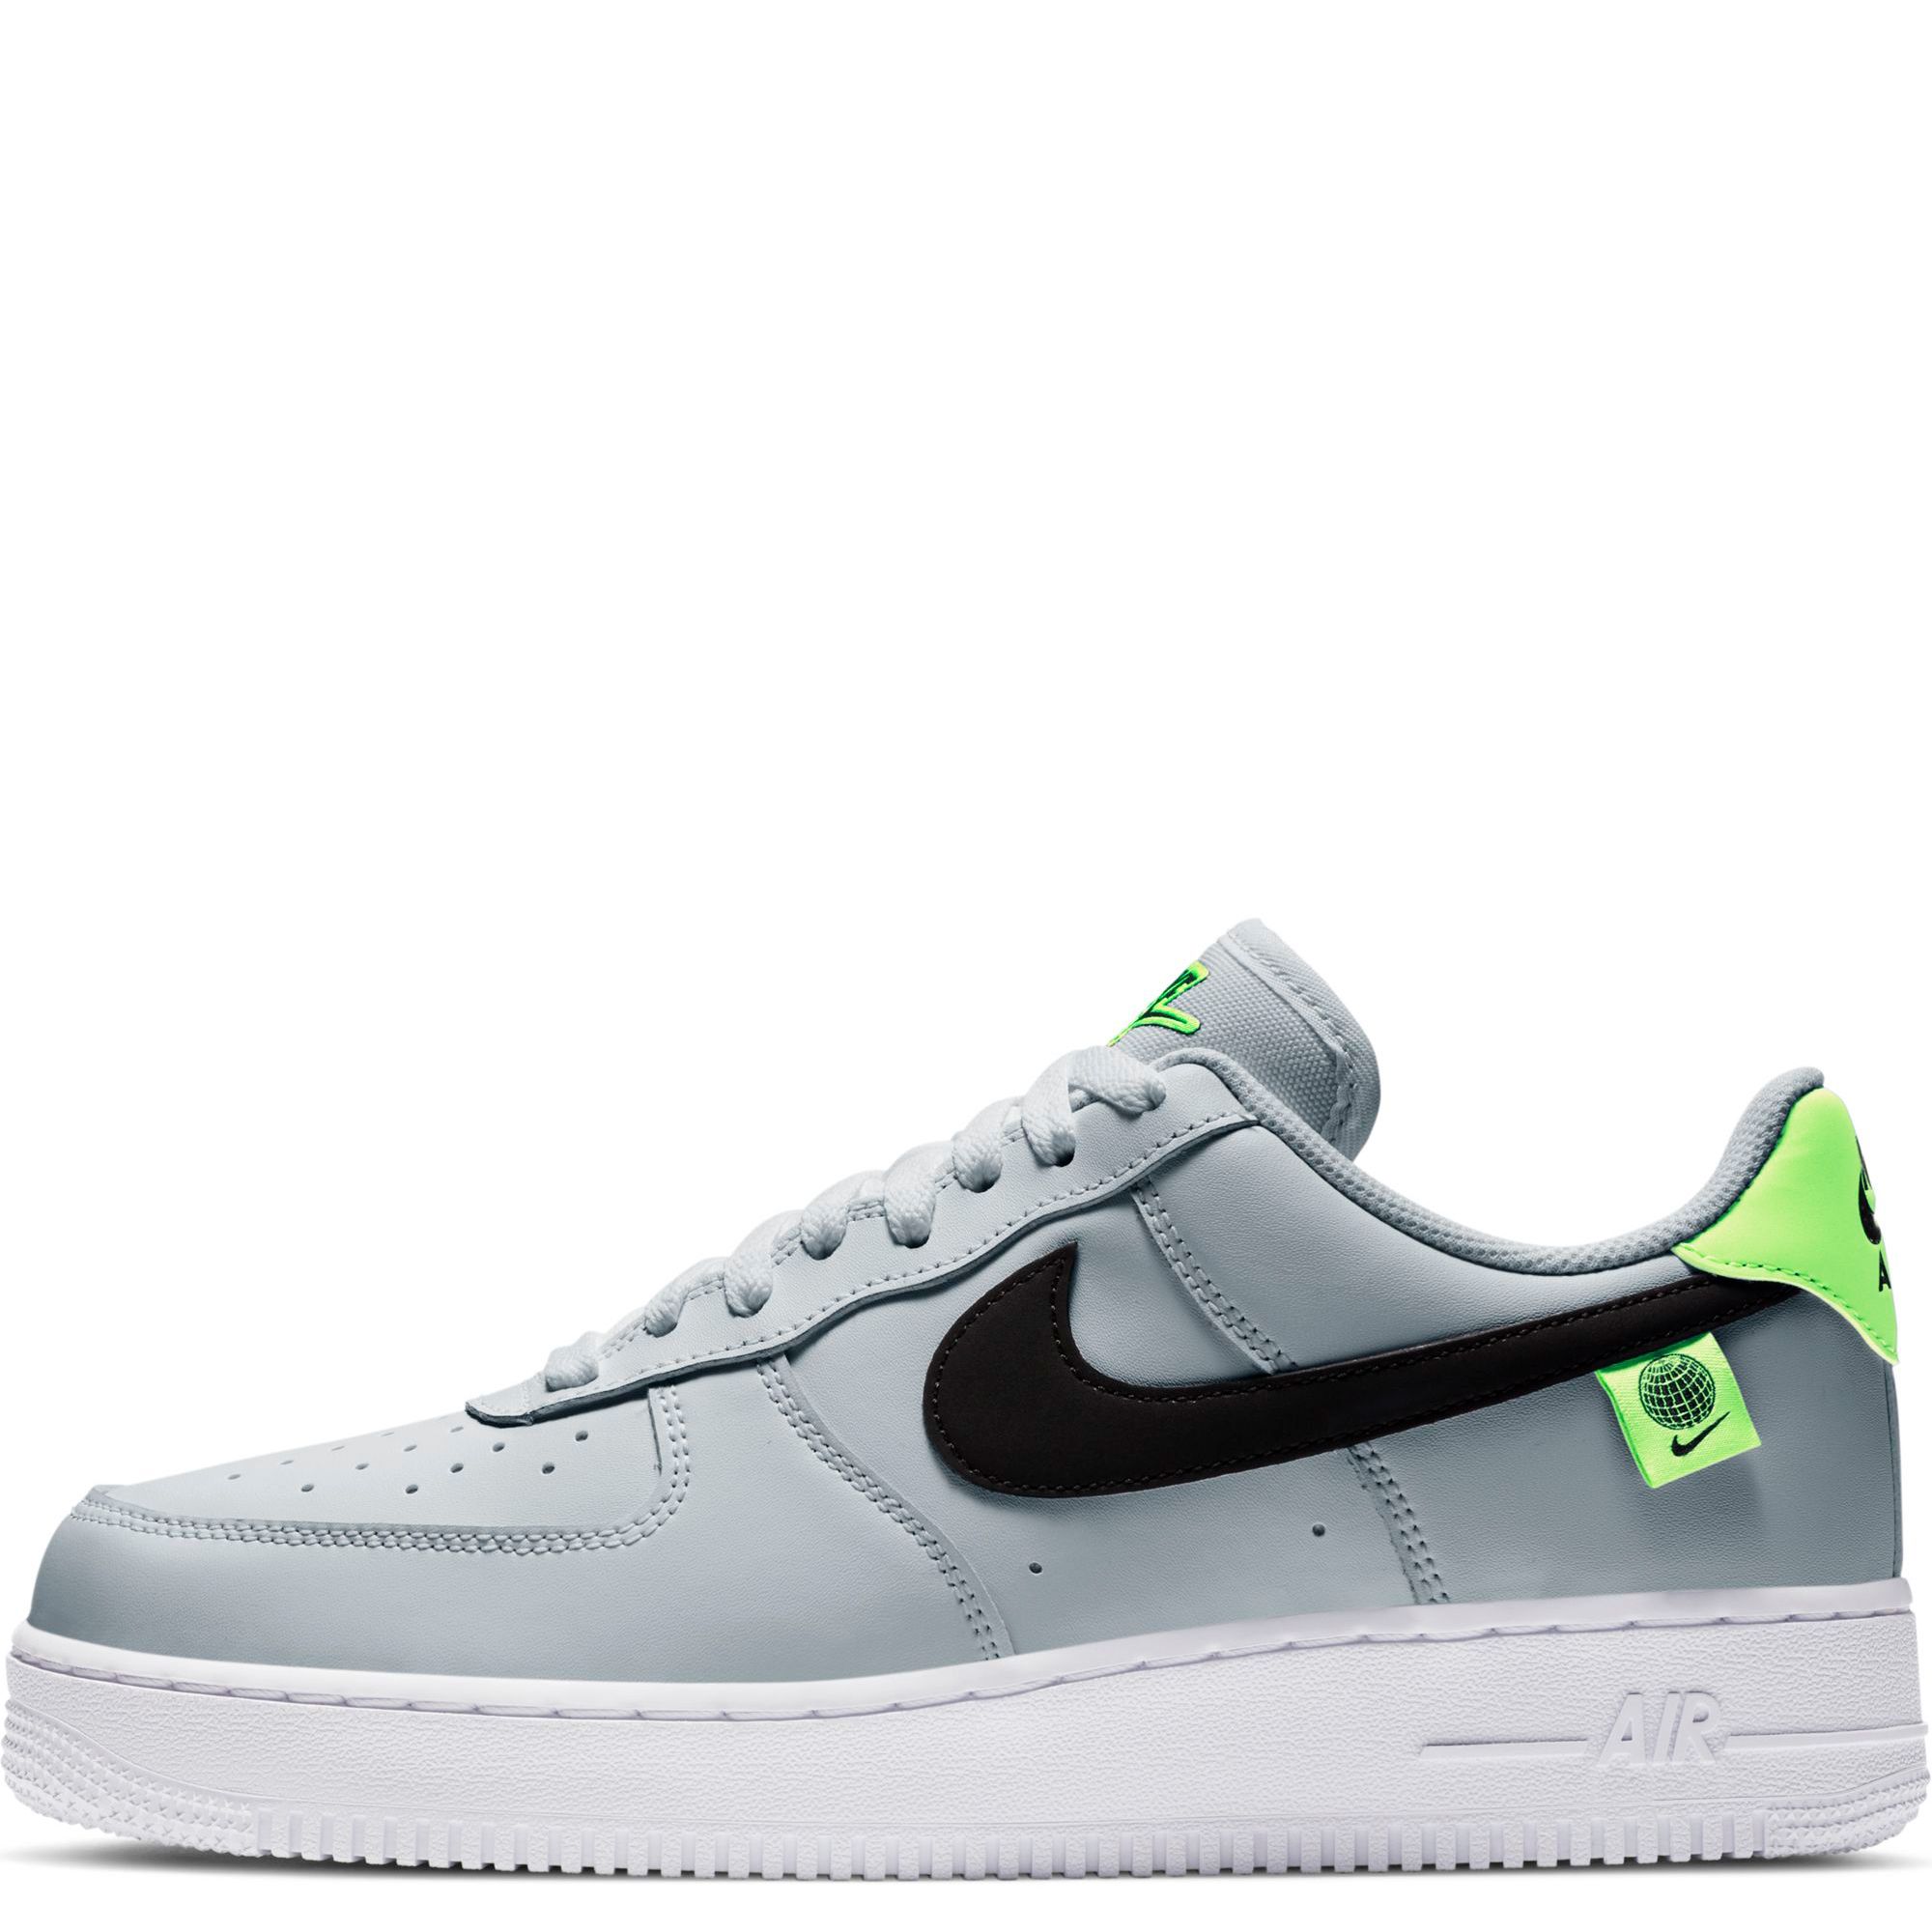 air force one white green